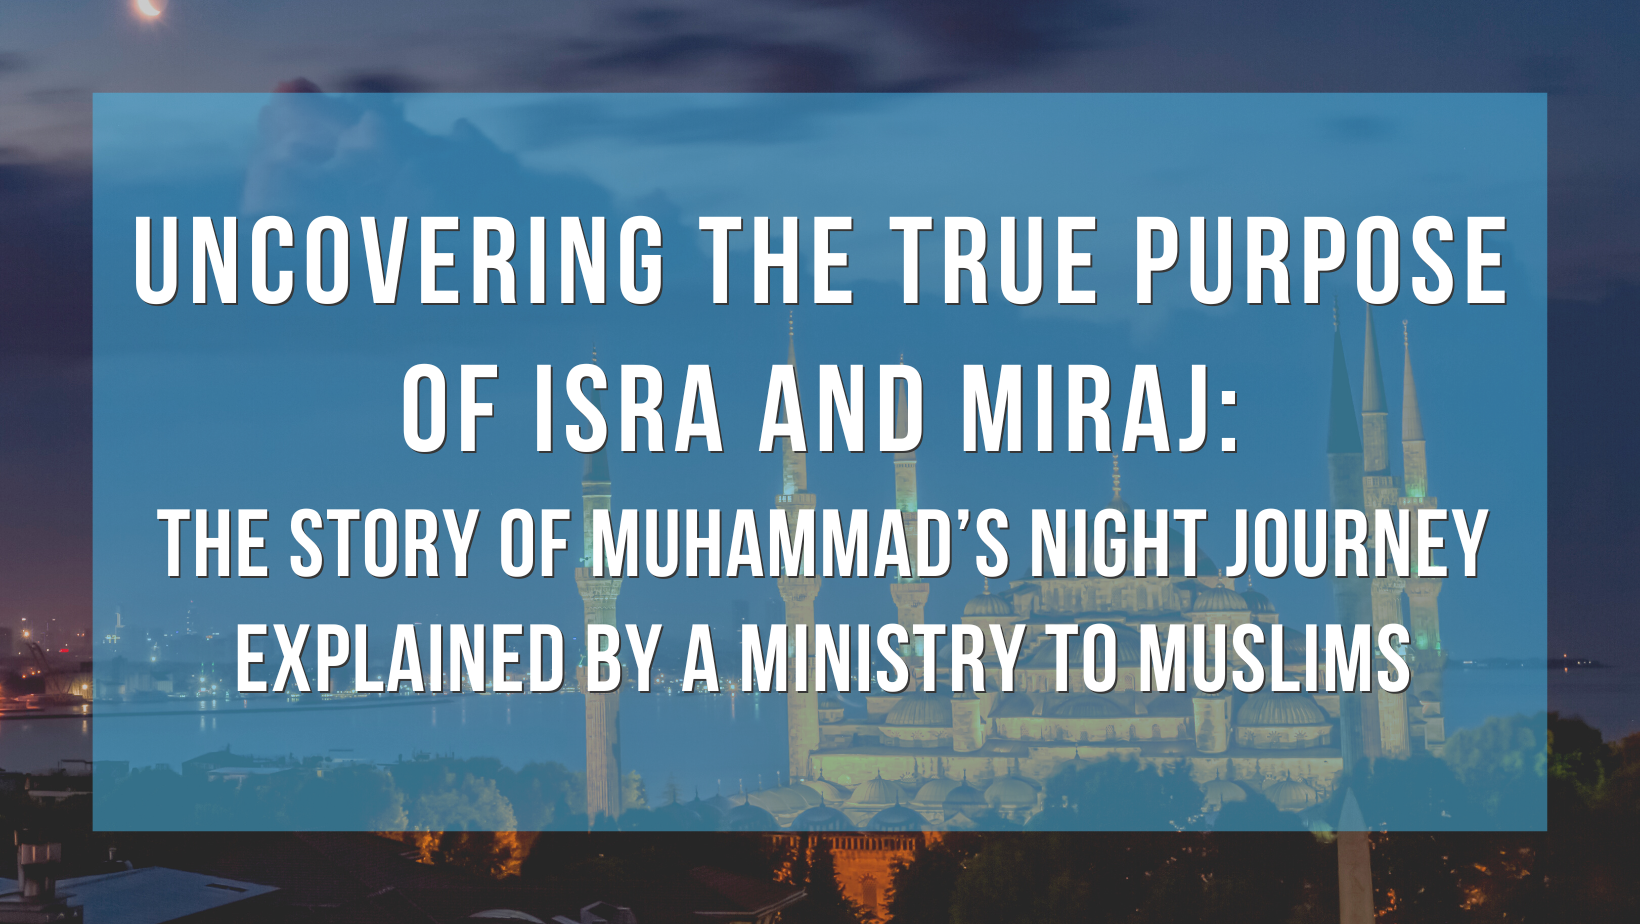 Uncovering the true purpose of Isra and Miraj: The story of Muhammad’s Night Journey explained by a ministry to Muslims